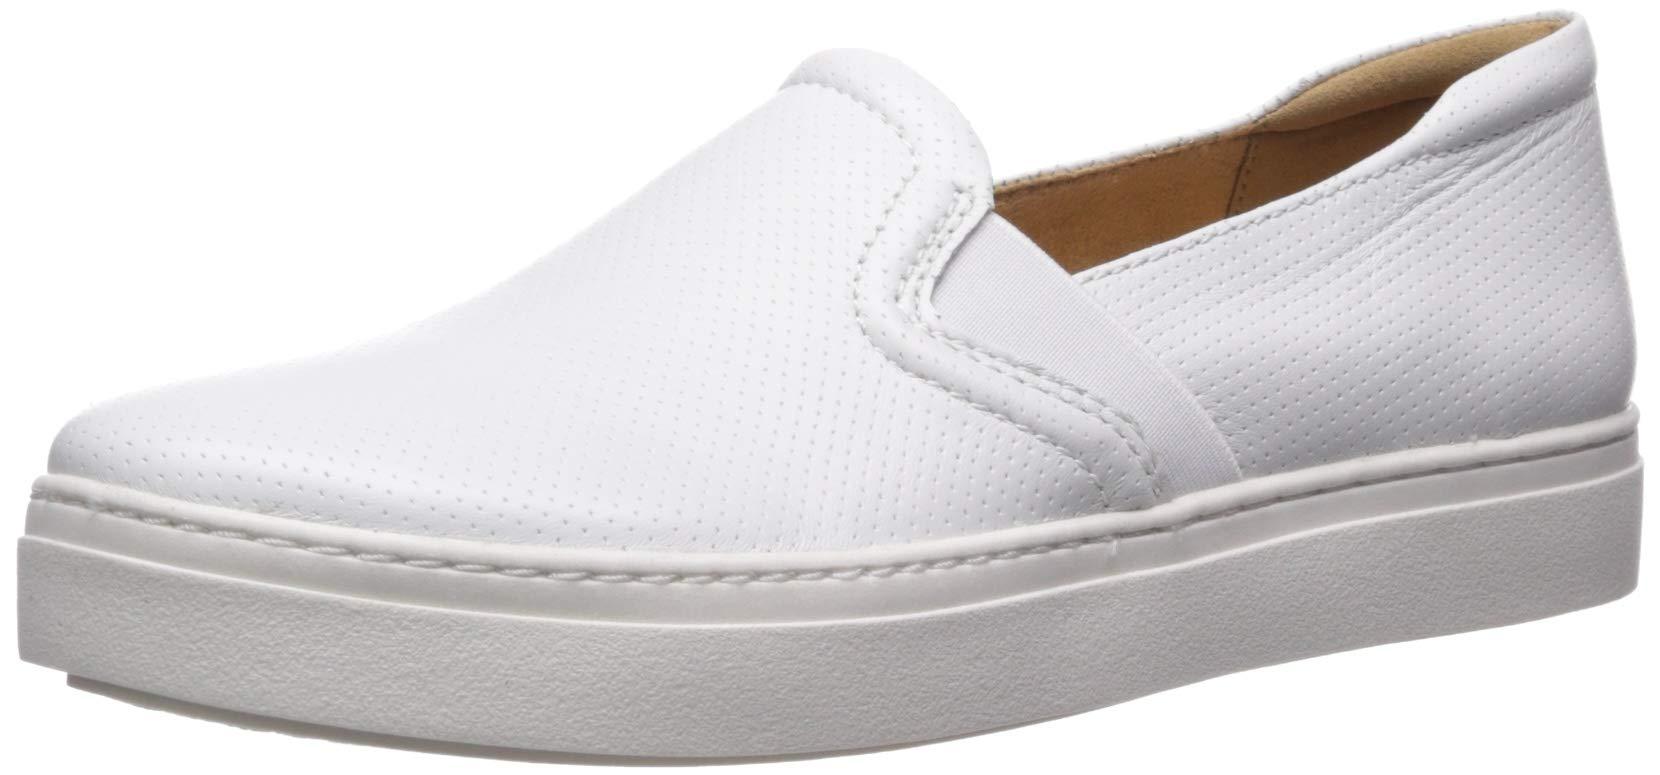 Naturalizer Carly 3 Shoe in White - Lyst